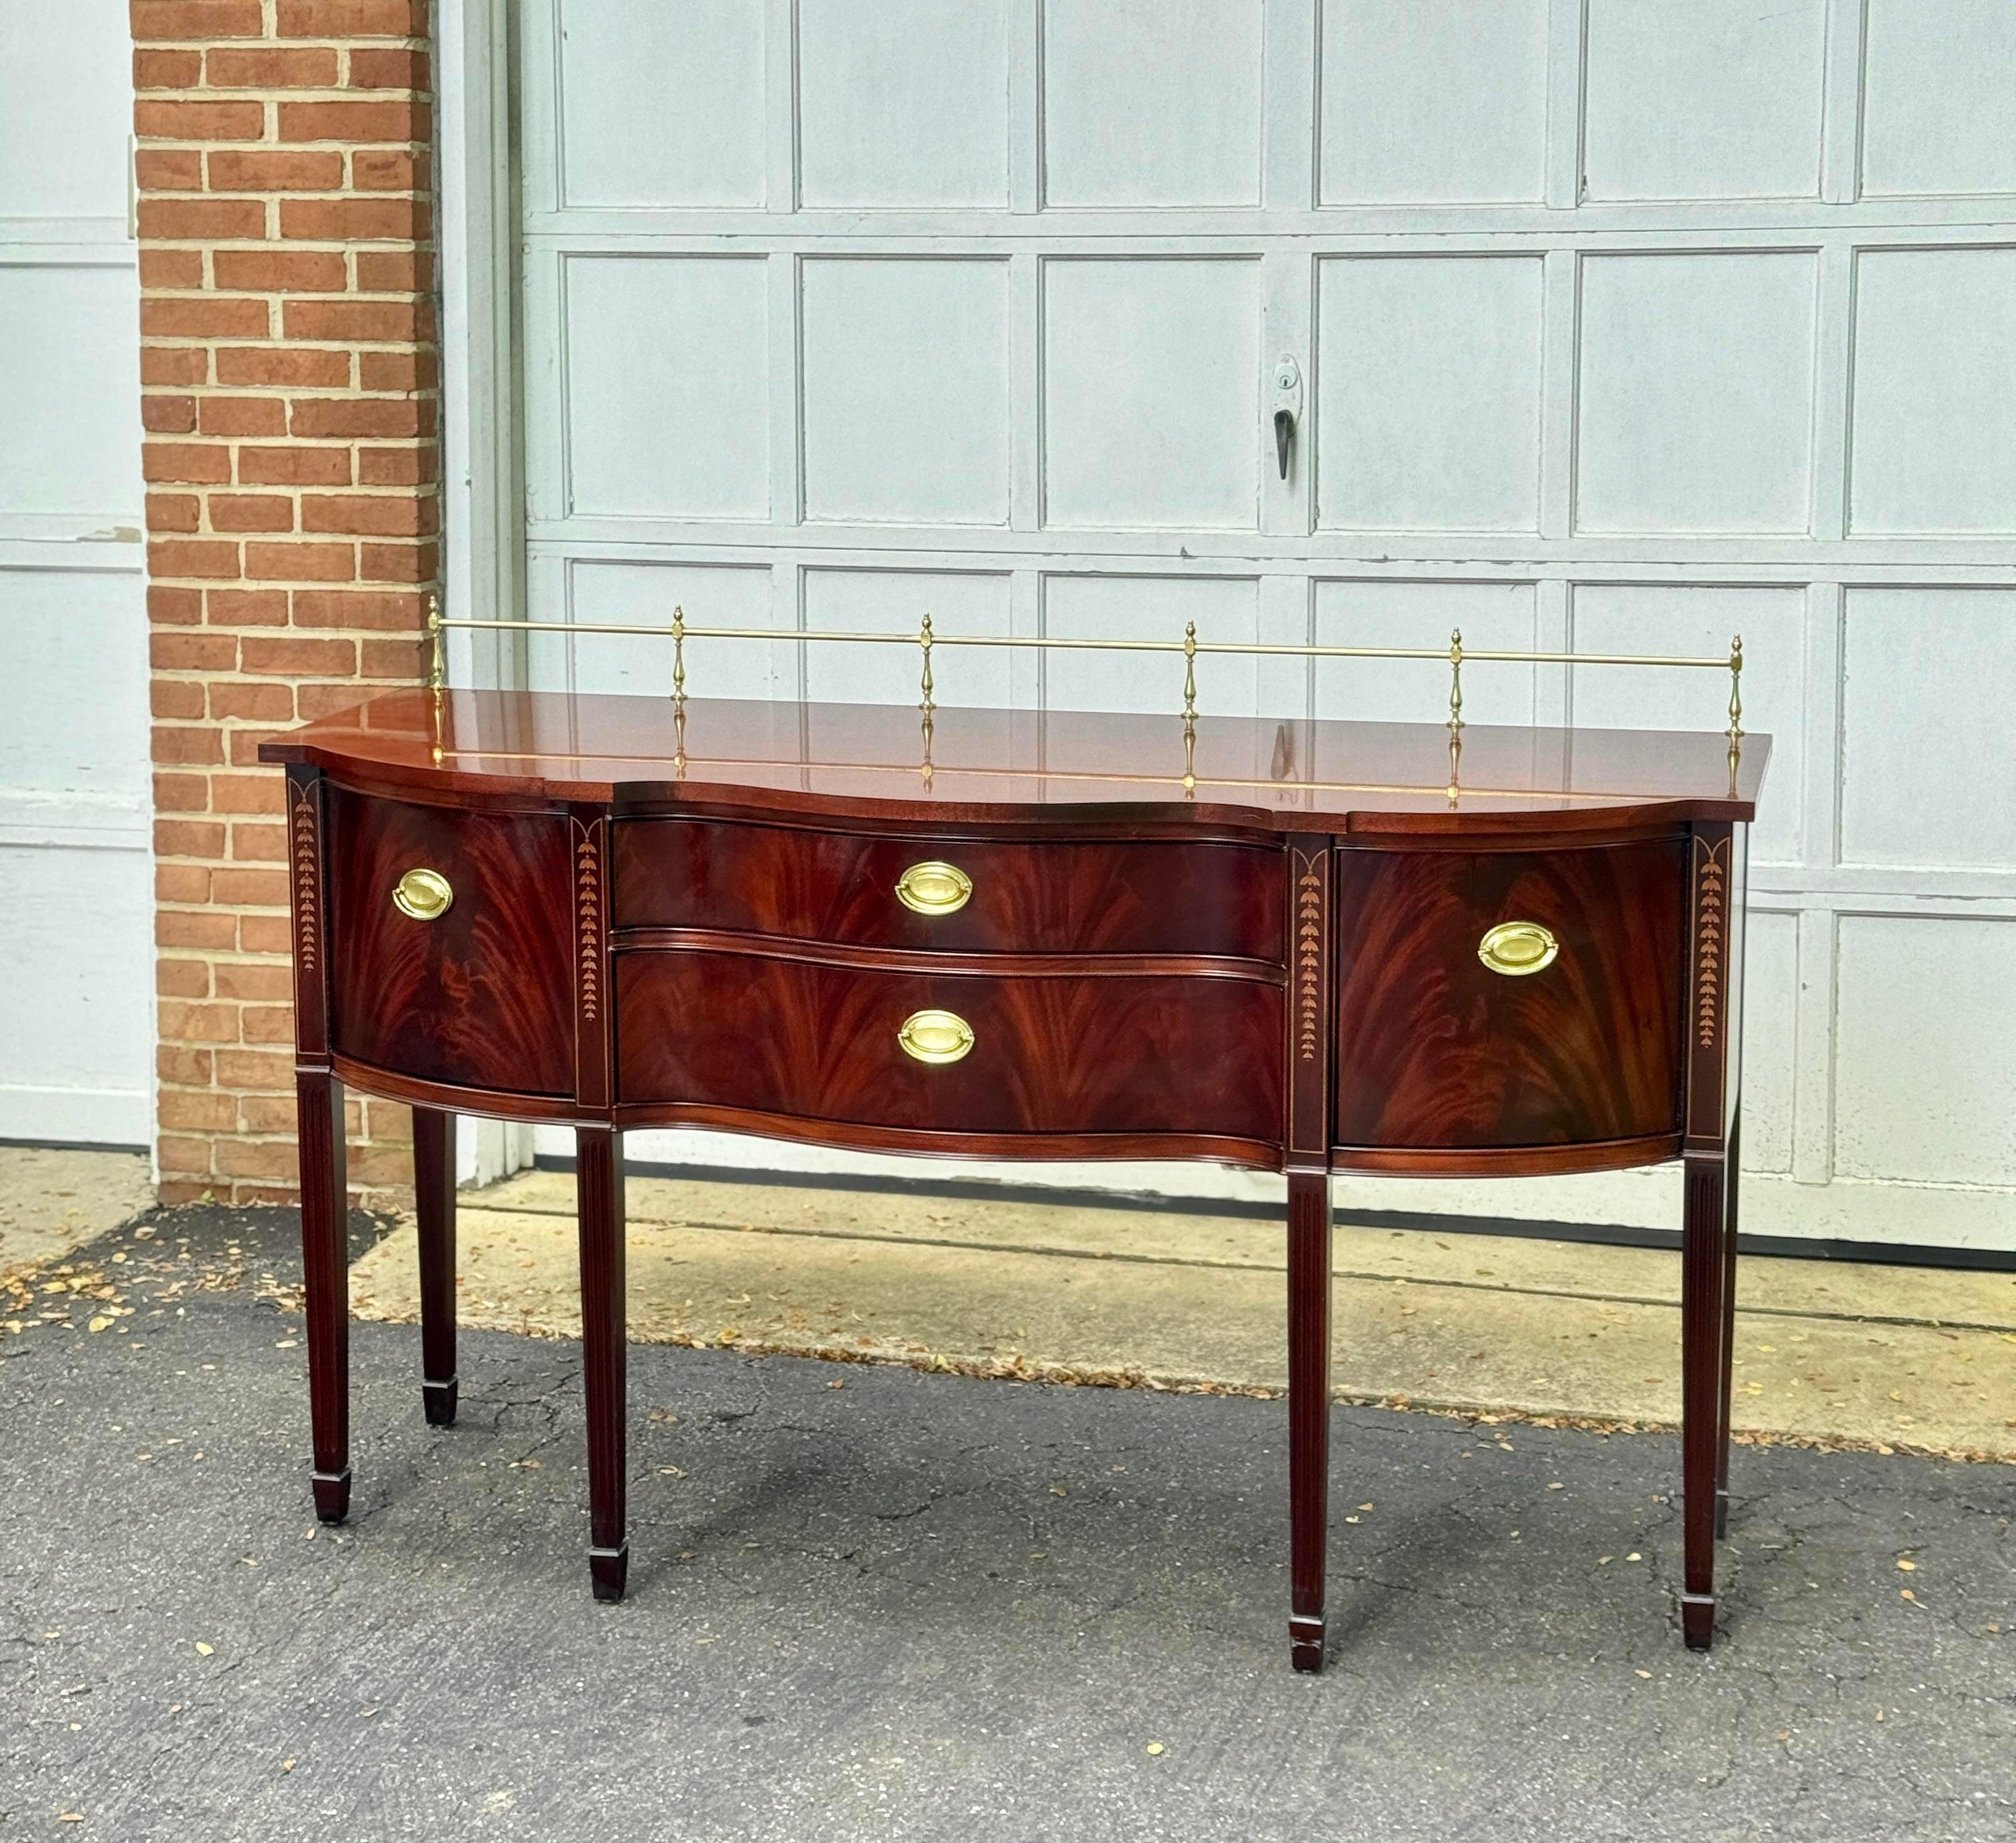 Features high-quality construction, beautiful flame mahogany and decorative inlays, cabinet doors on each side, two dovetailed drawers, Georgian brass hardware & gallery bar, and tapered legs with spade feet.